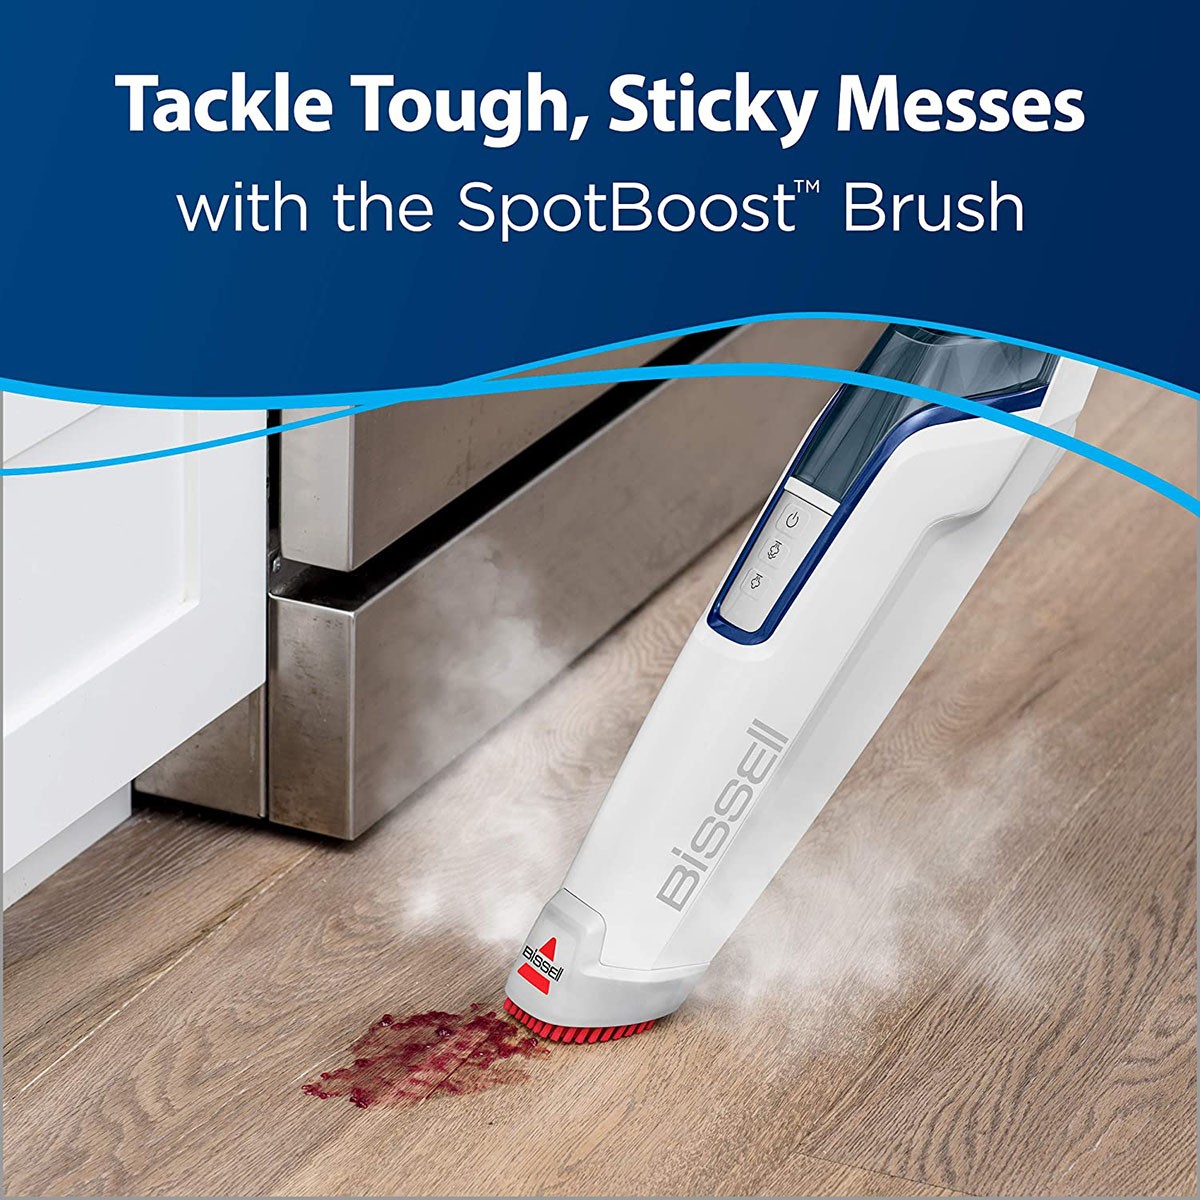 https://s3-assets.sylvane.com/media/images/products/bissell-1806-powerfresh-steam-mop-spotboost-brush.jpg